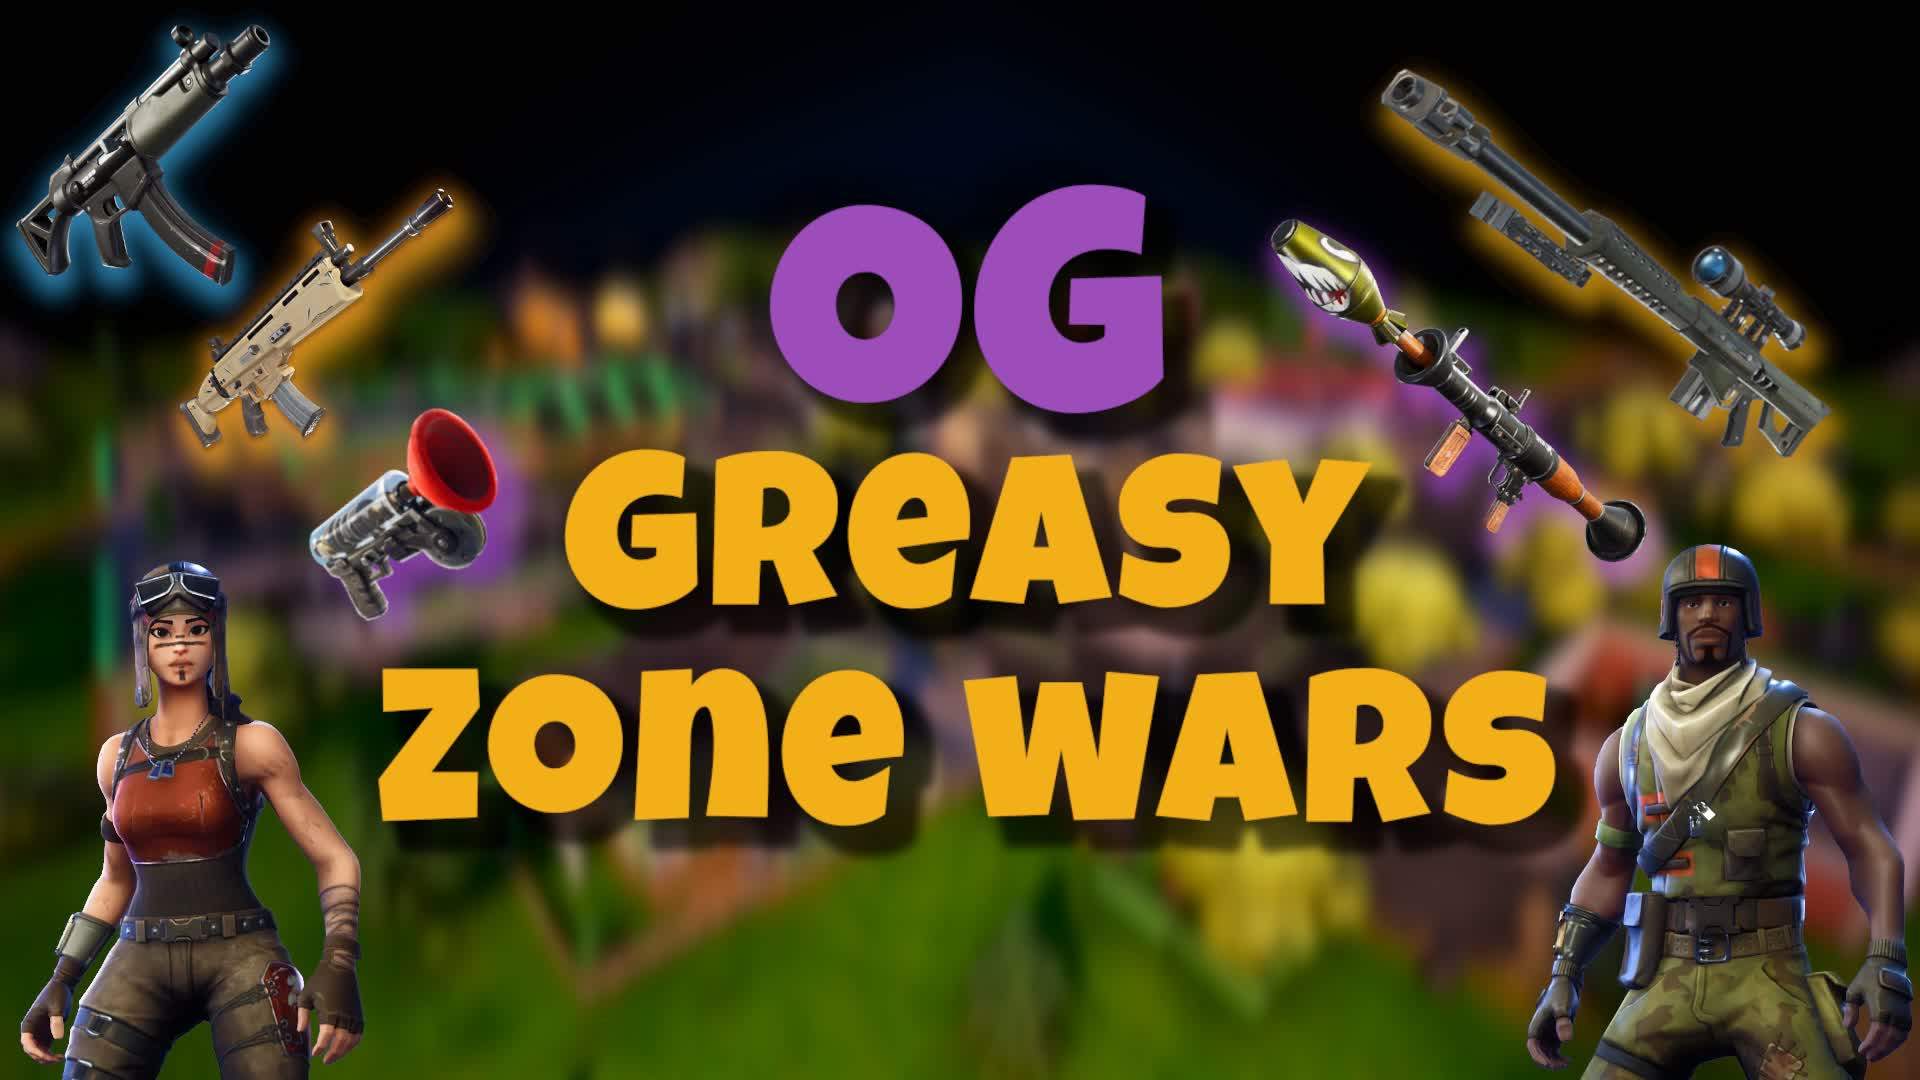 OG Greasy Grove Zone Wars [End Game]